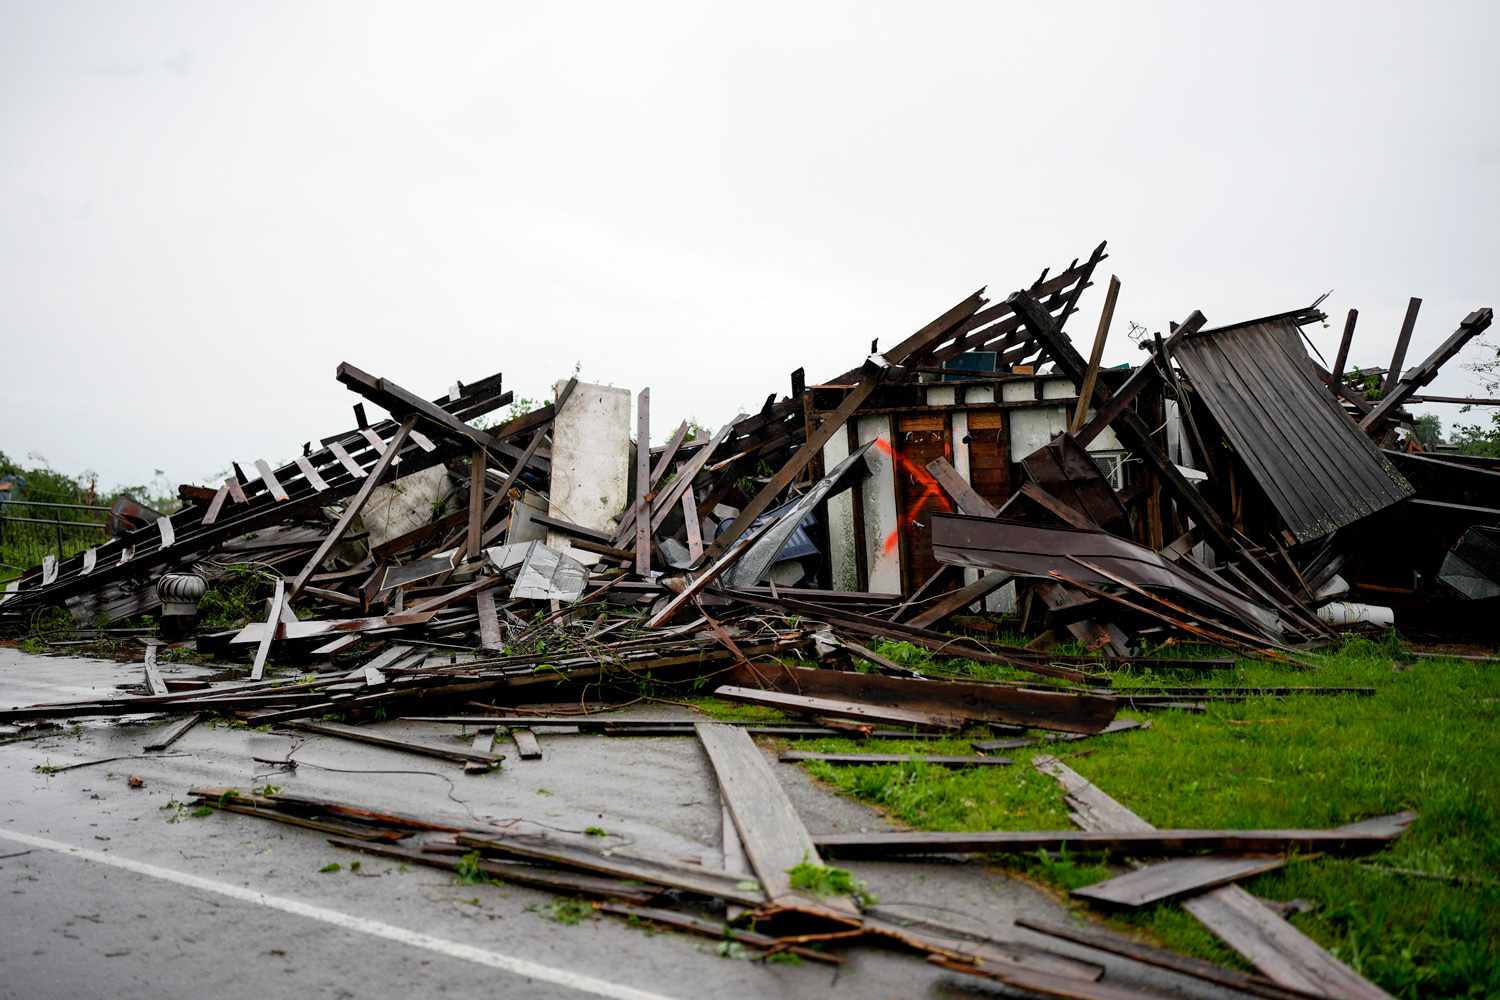 3 Dead After Tornadoes Hit Tennessee, North Carolina: 'All Hell Breaking Loose'